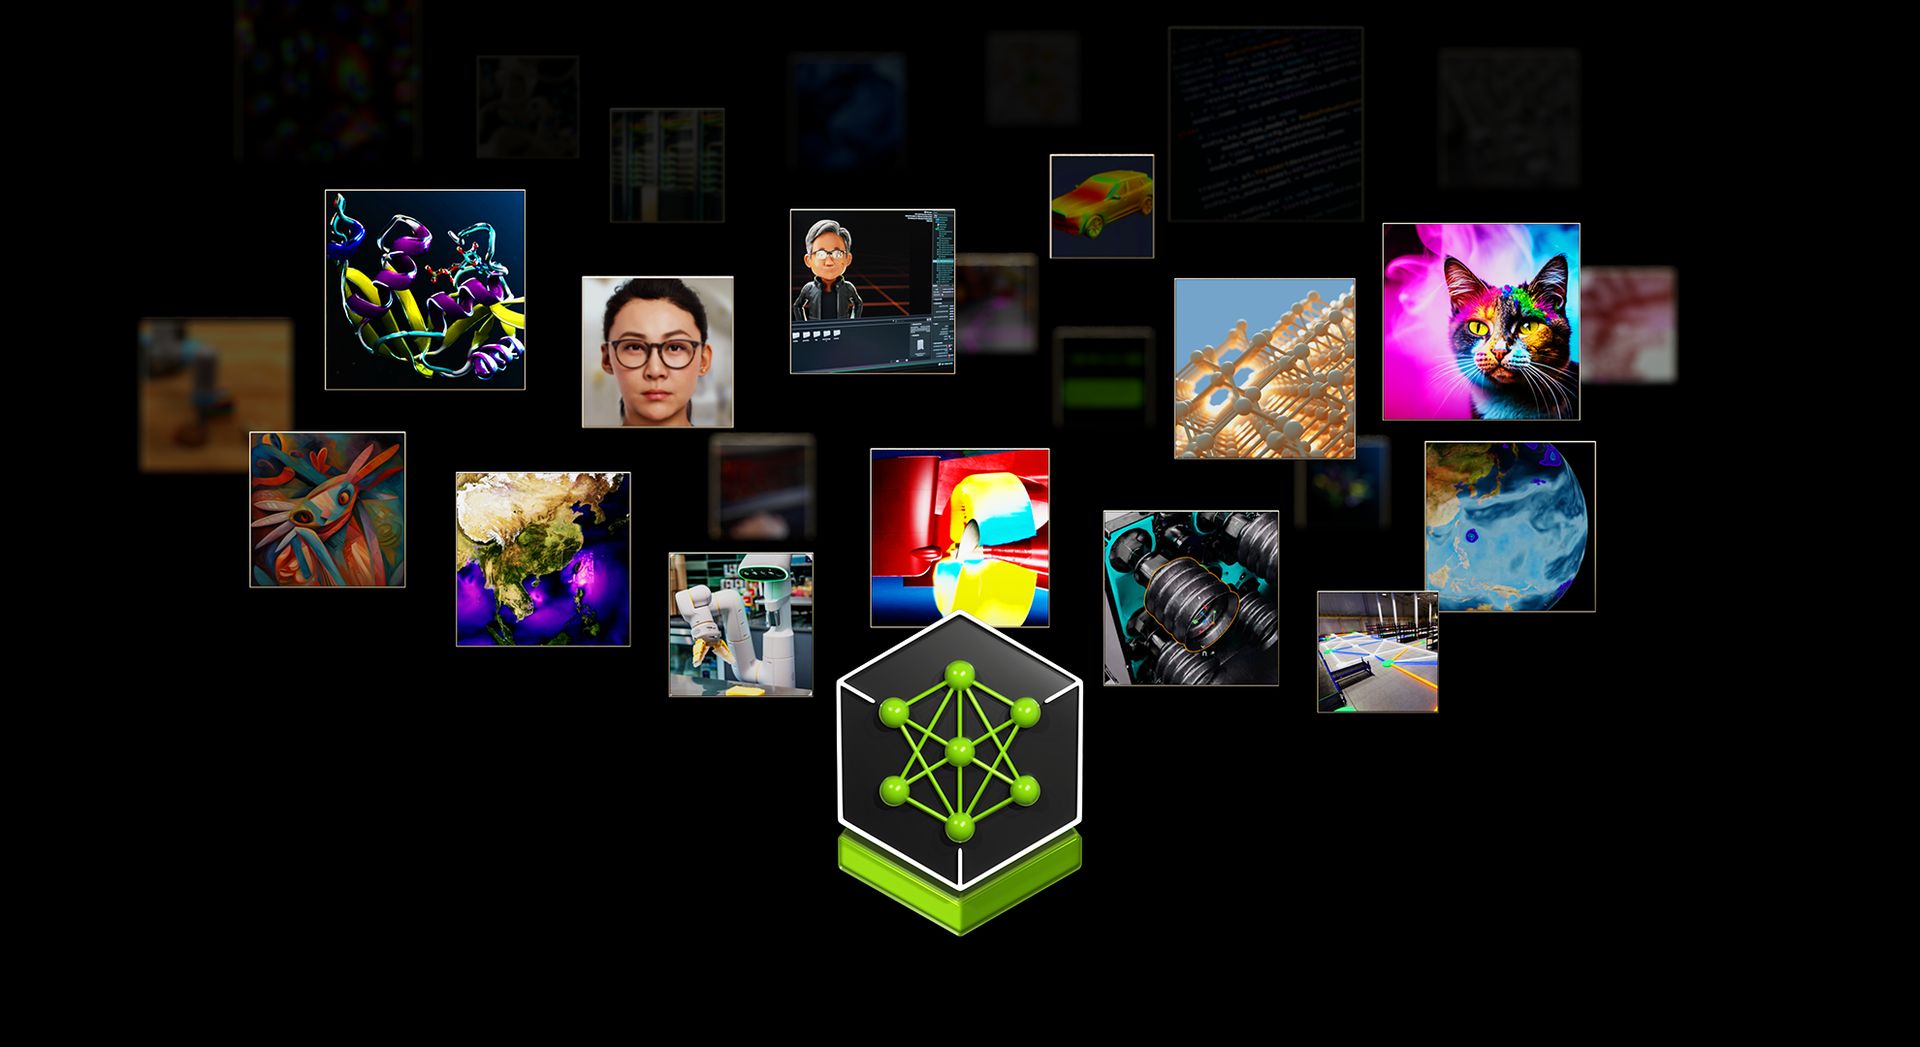 NVIDIA is elevating AI deployment to new efficiencies with NIM